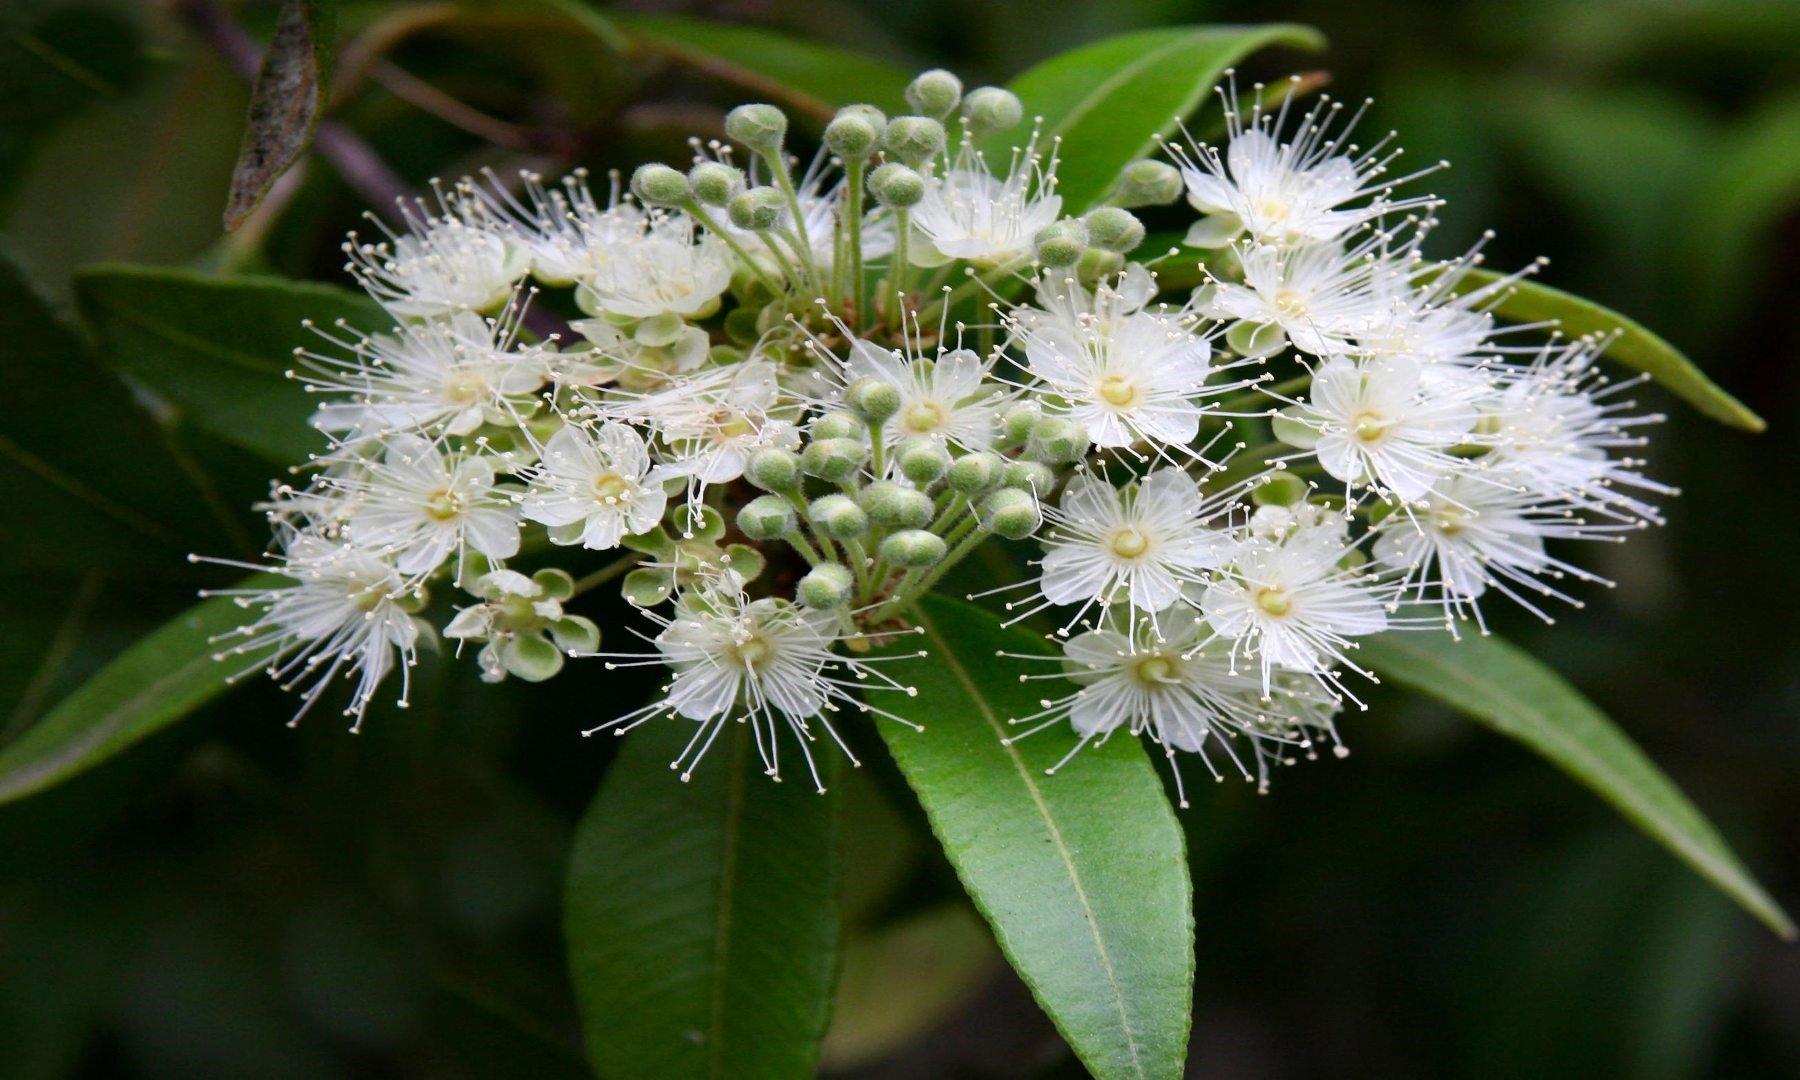 Lemon Myrtle – it's medicinal use and powerful flavour